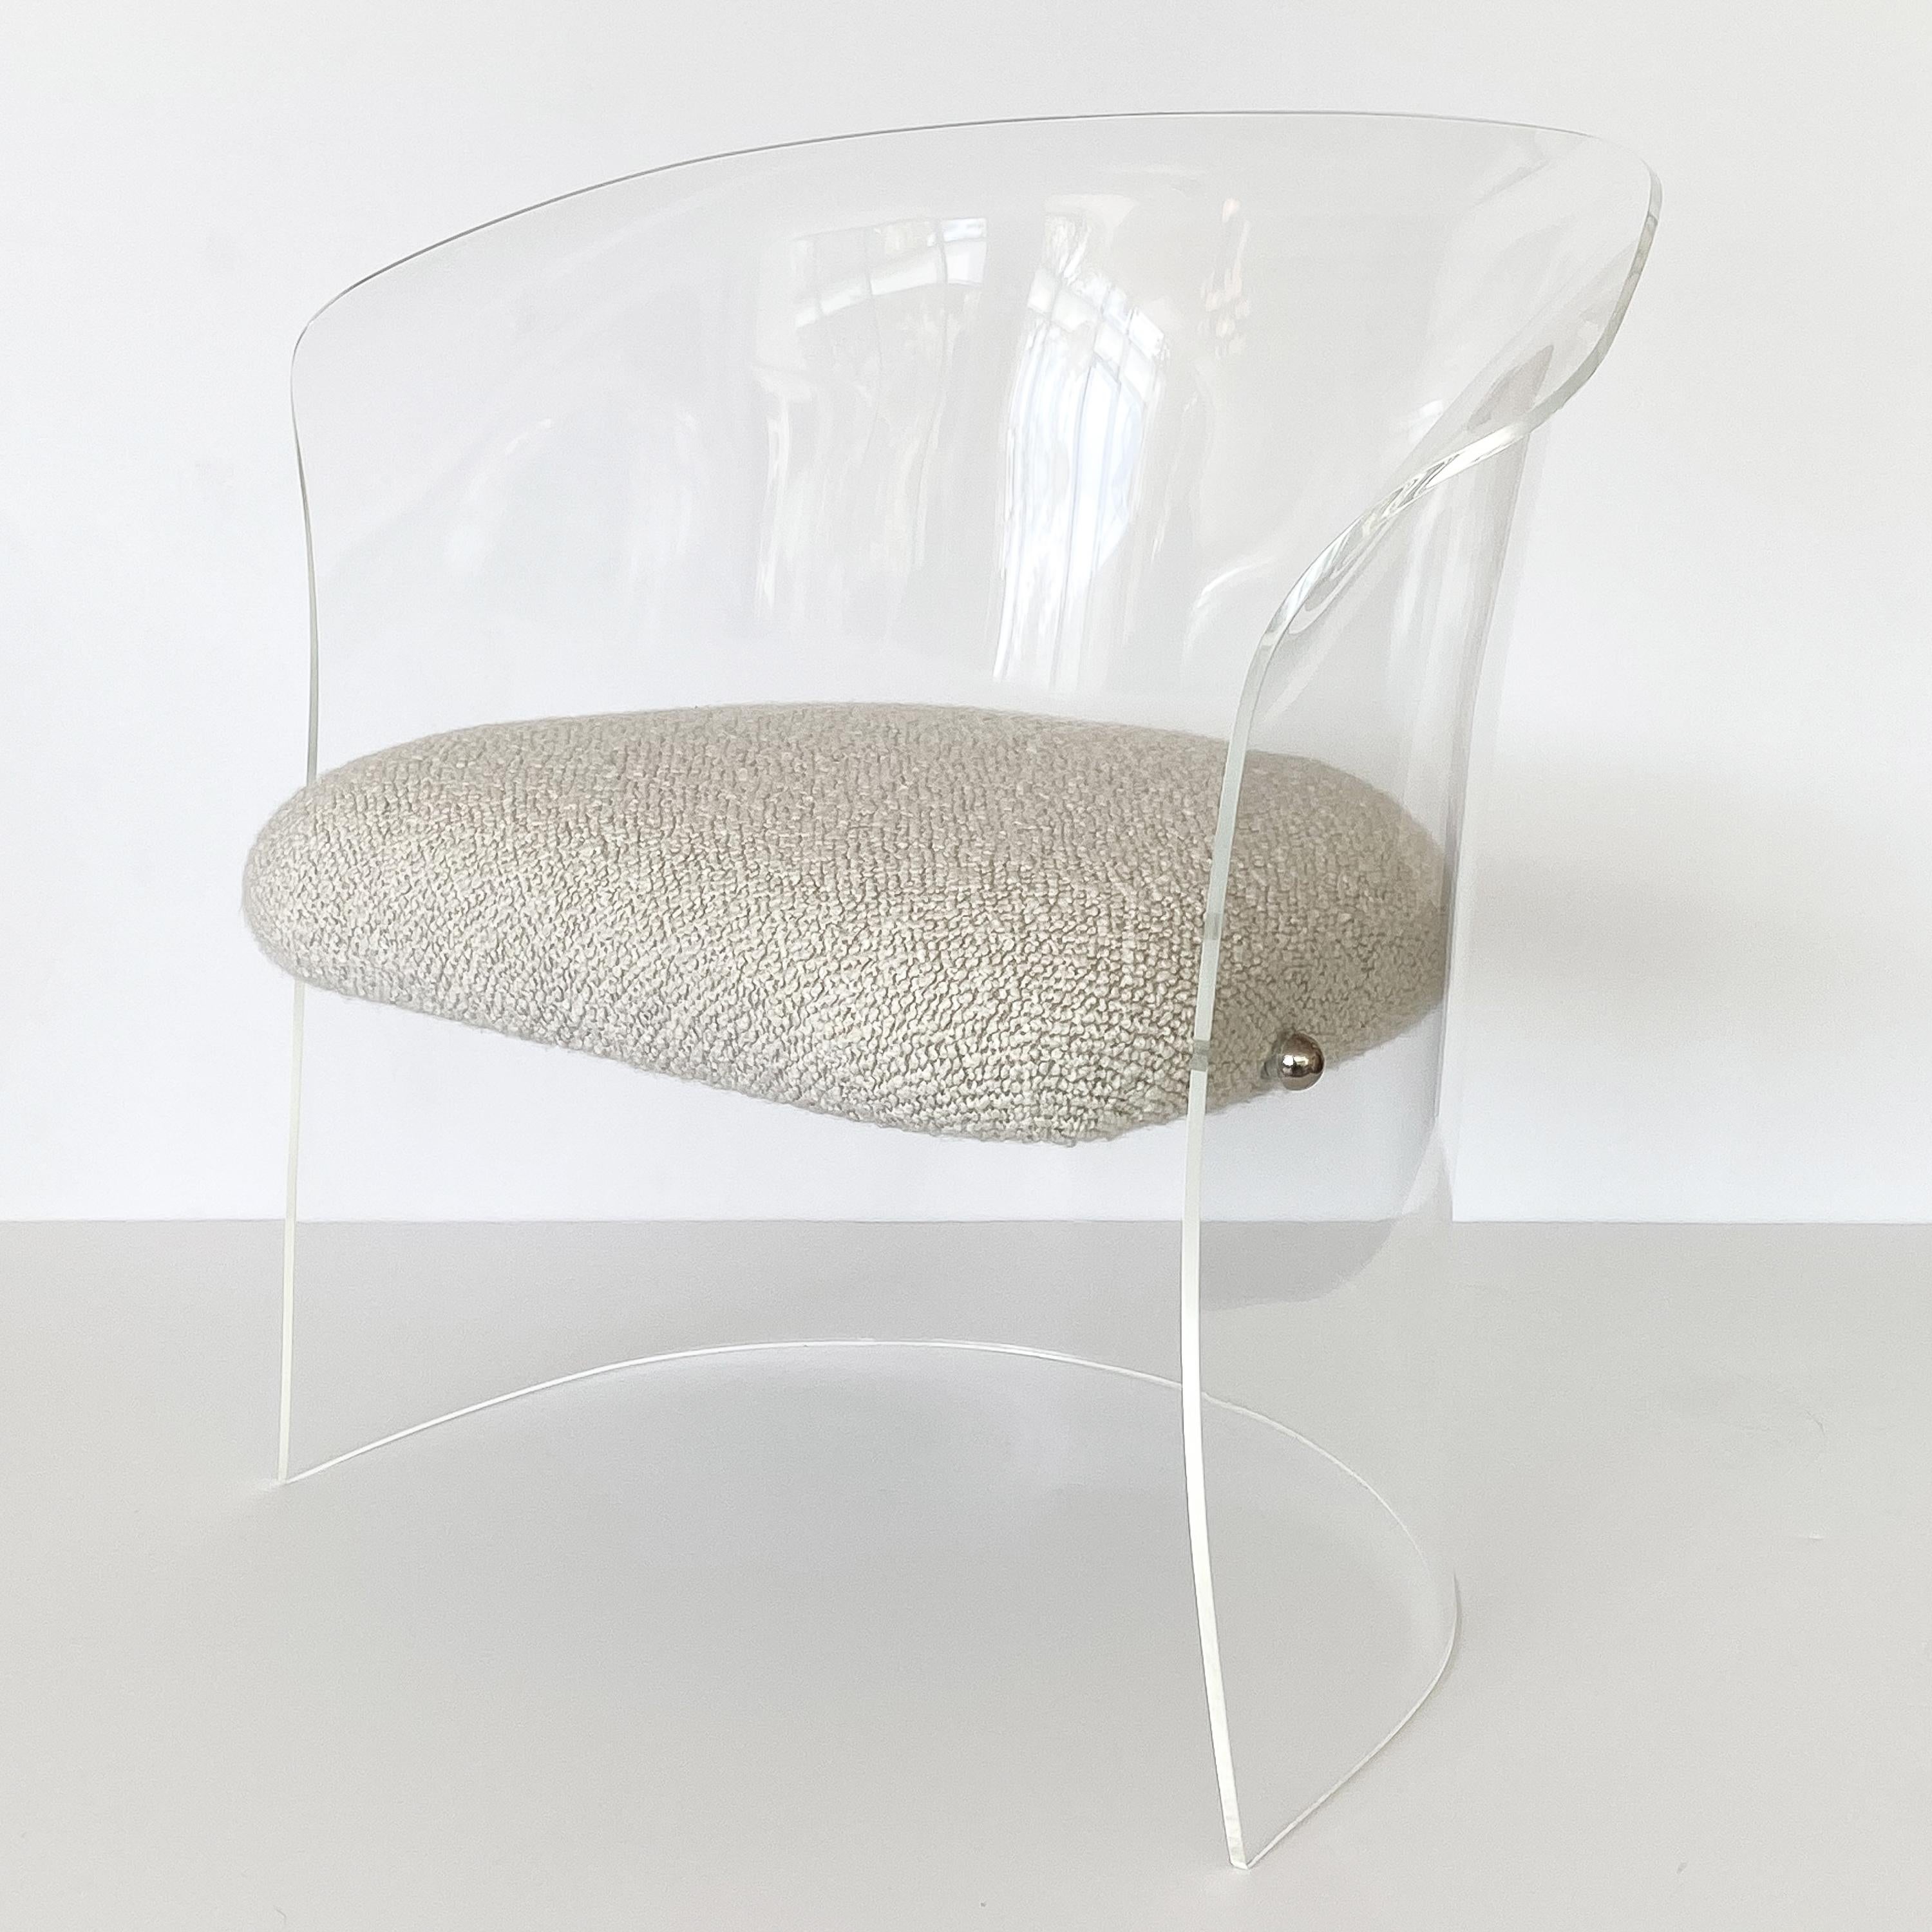 A Lucite barrel back occasional chair, circa 1970s. This chair is comprised of a single sheet of bent and molded Lucite. A single seat is suspended within the form by chrome dome shaped connectors. Newly upholstered in a chunky textured pale stone